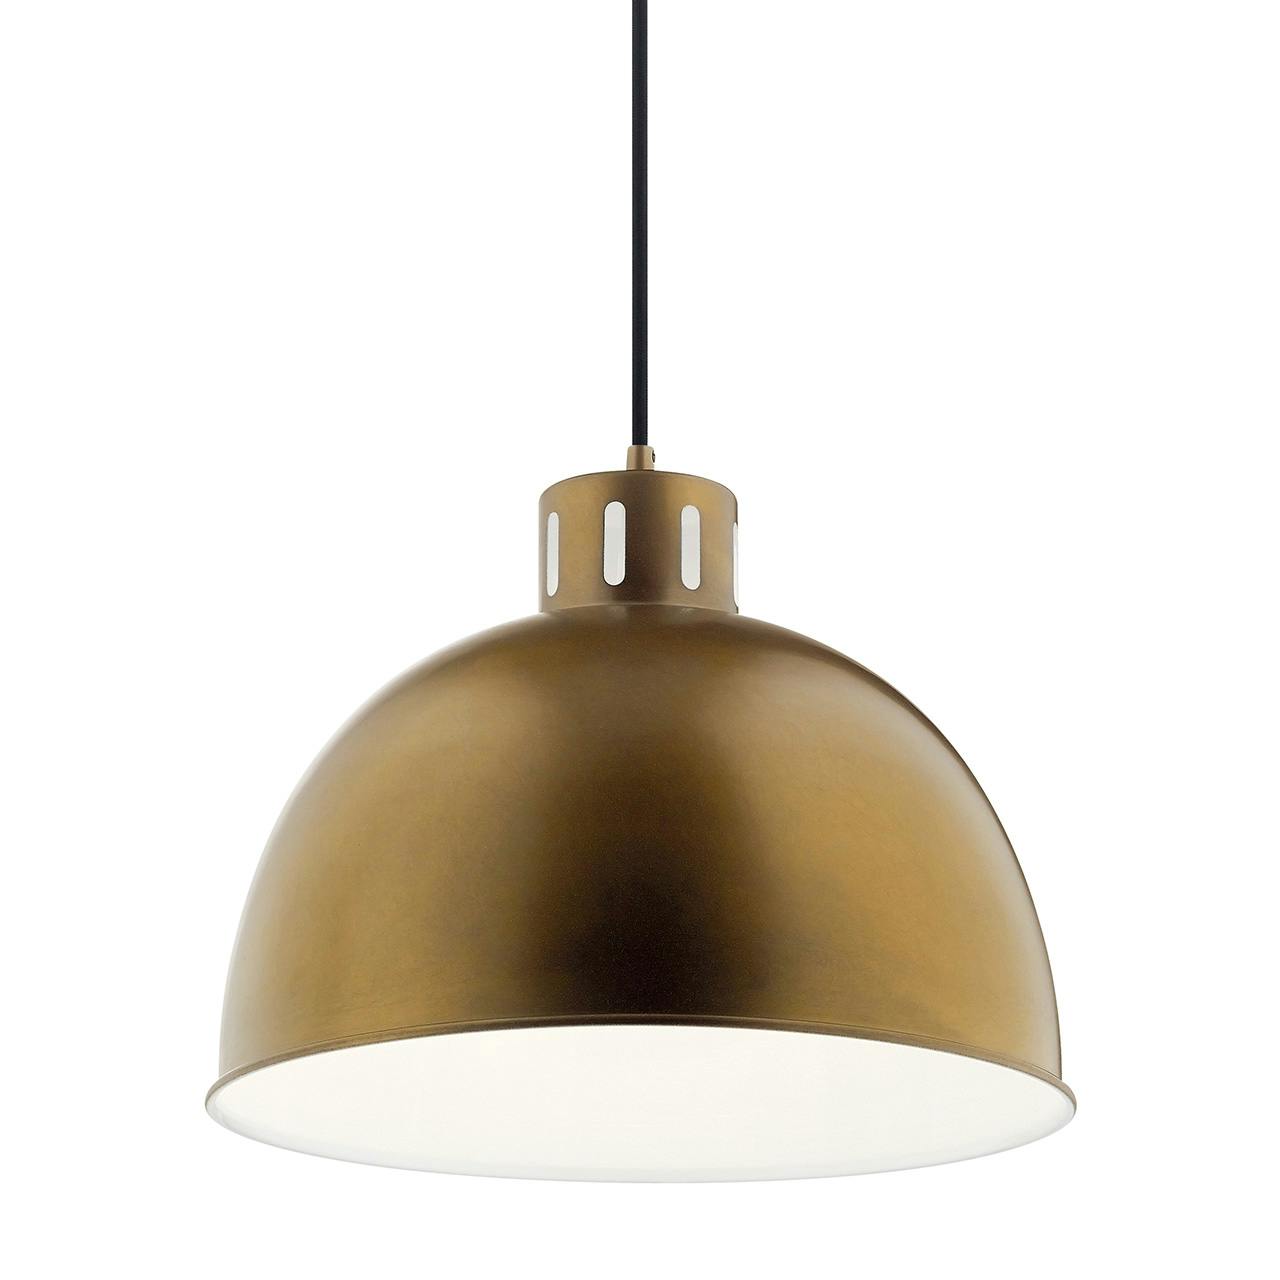 Zailey 15.75" 1 Light Pendant in Brass without the canopy on a white background